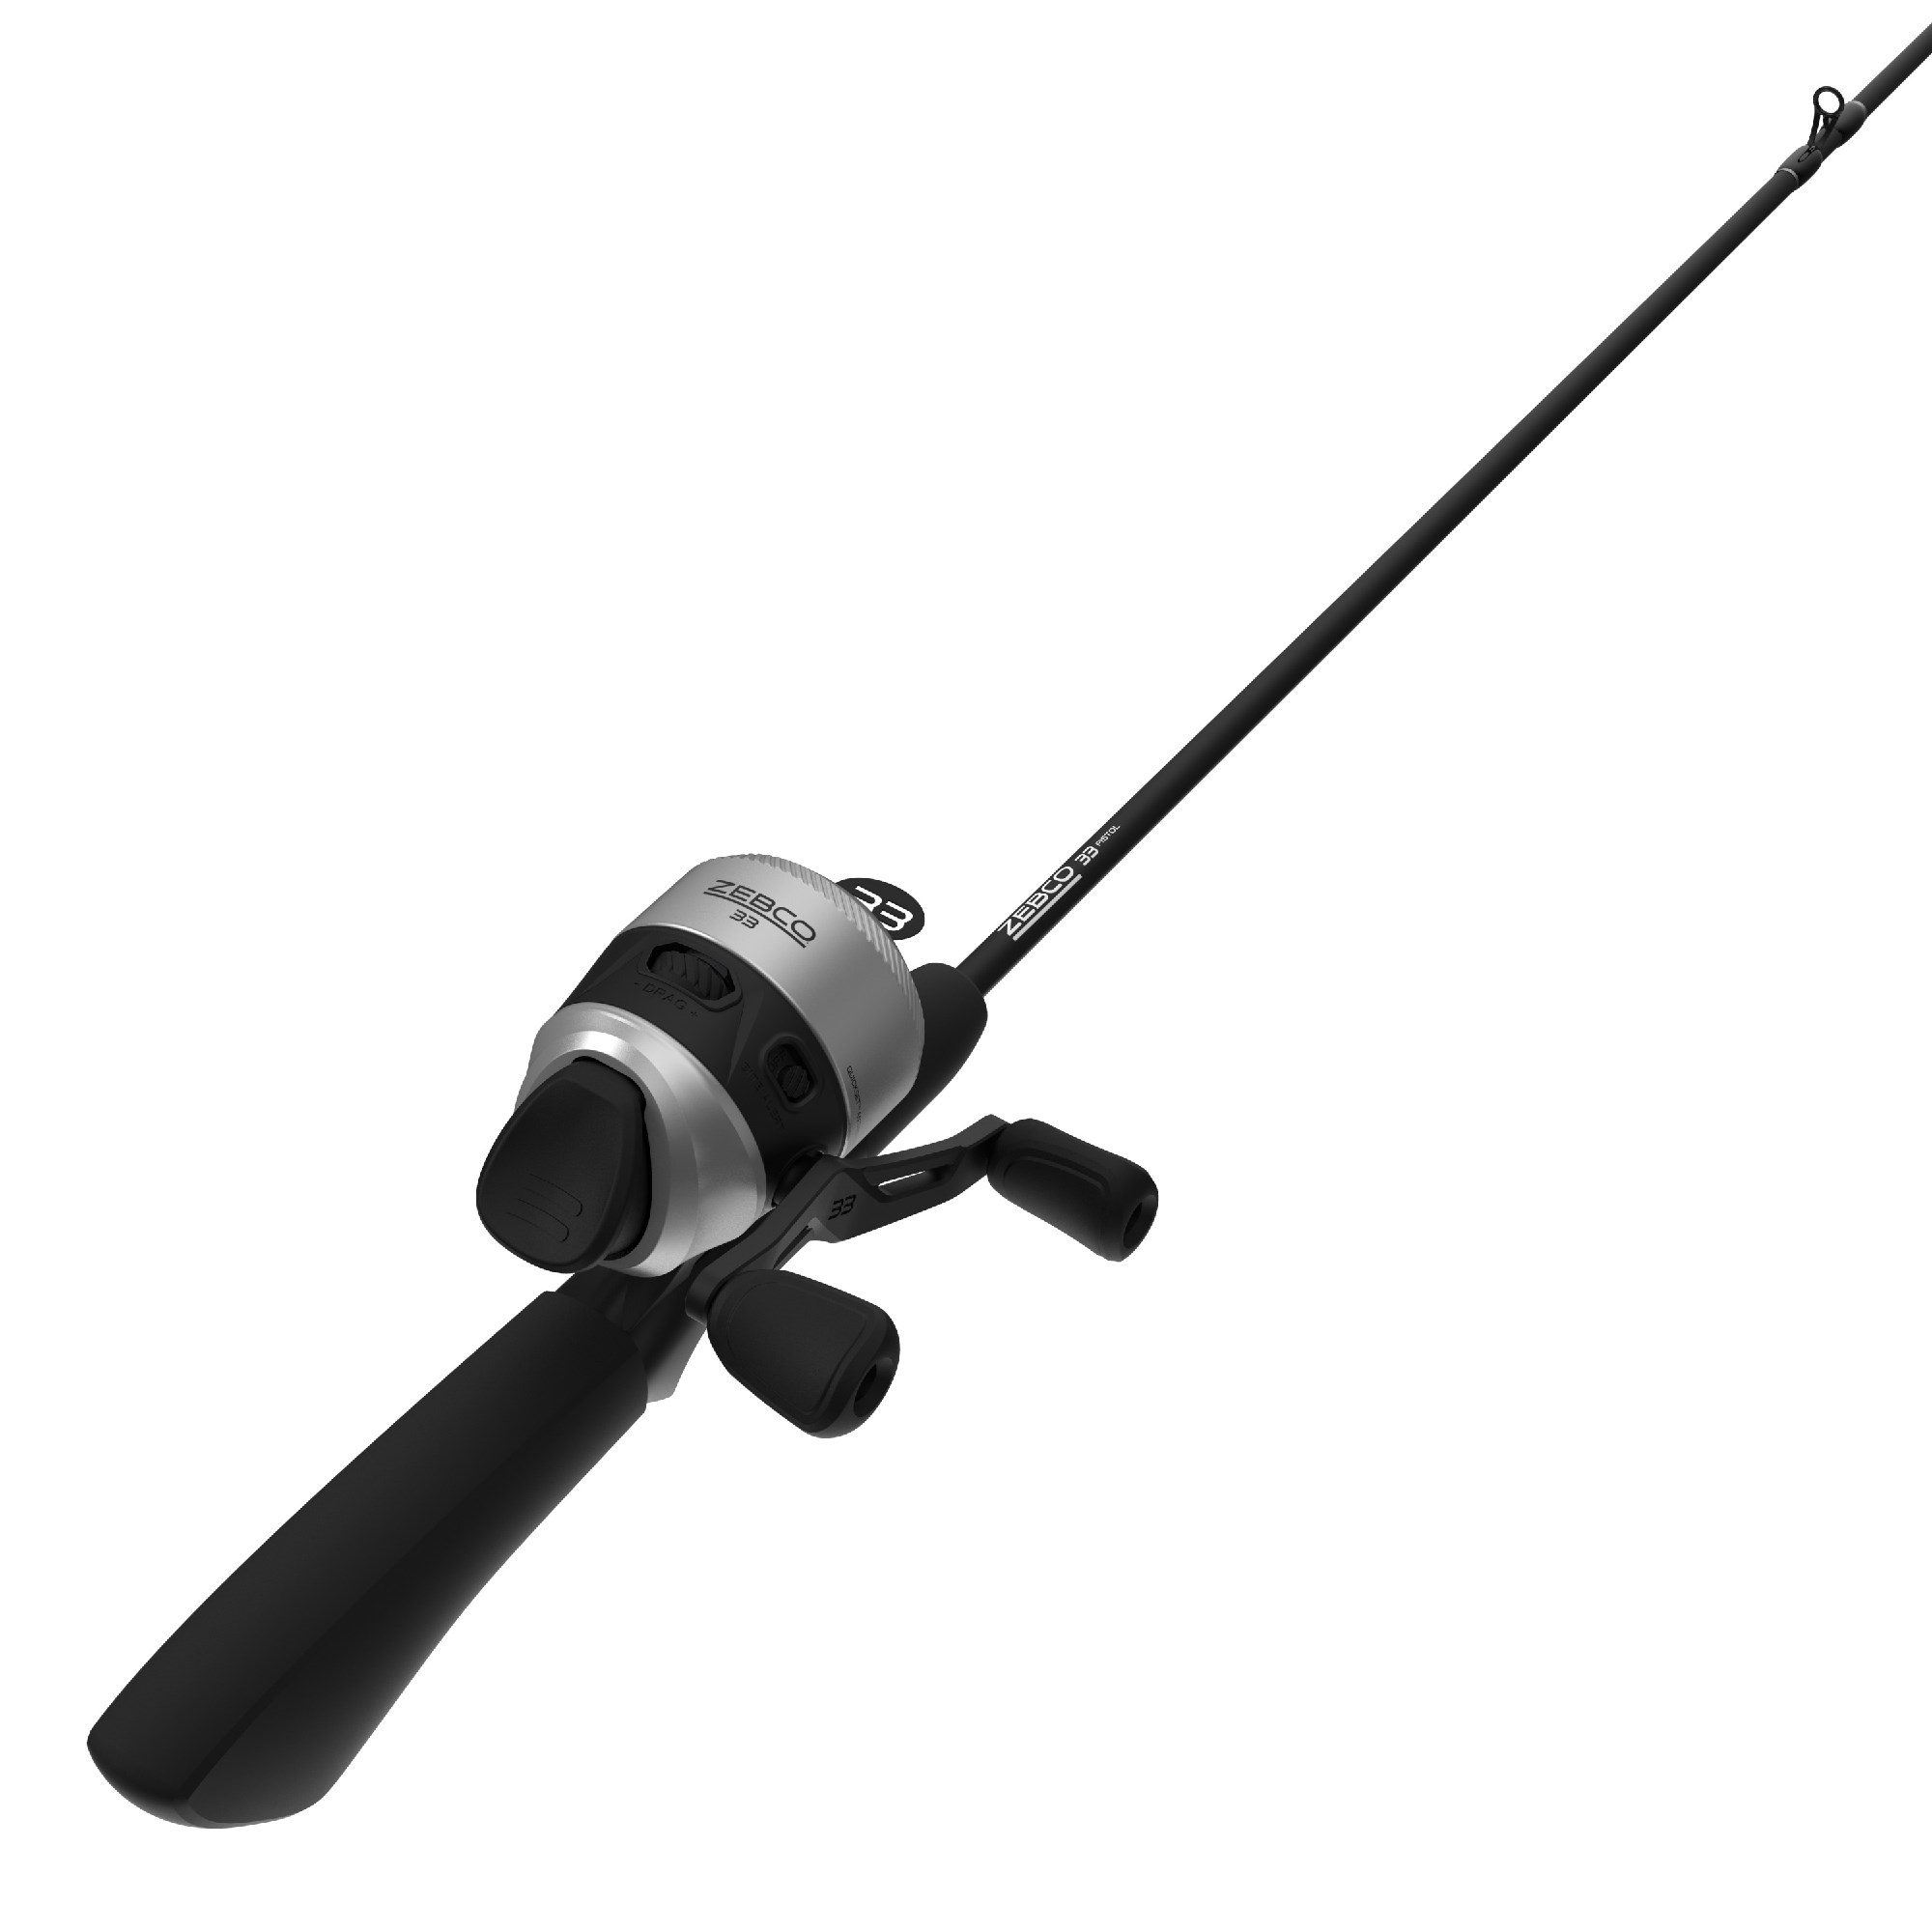 Zebco Spinning Combo Medium Light Fishing Rod & Reel Combos for sale